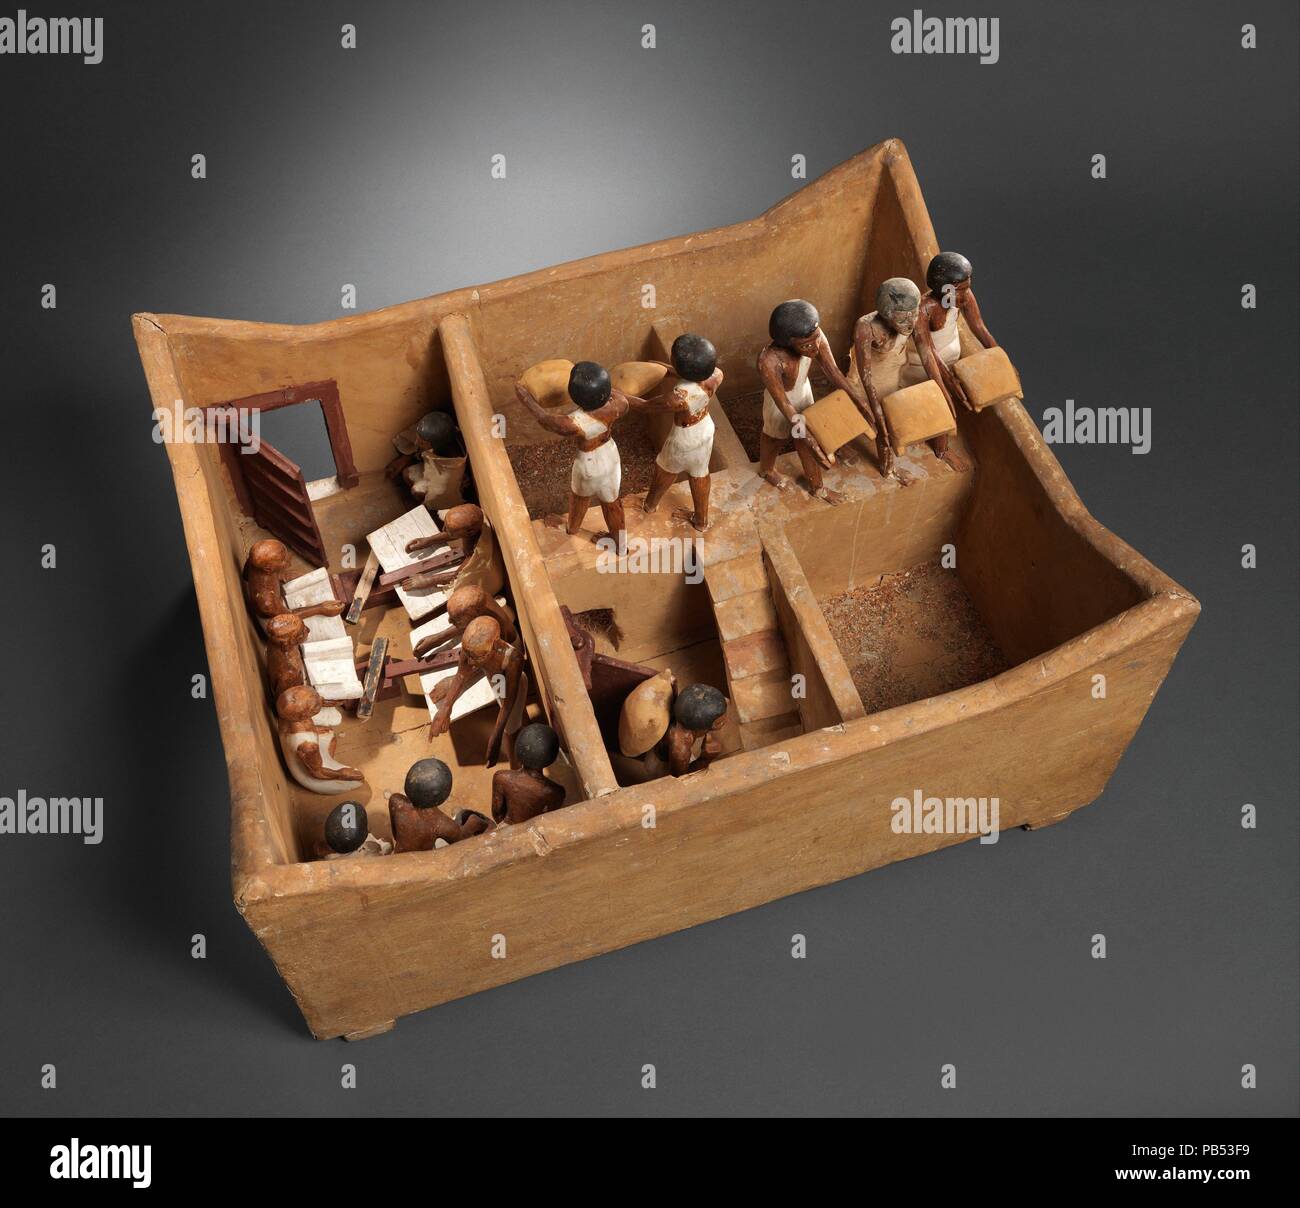 Model of a Granary with Scribes. Dimensions: L. 74.9 (29 1/2 in); W. 56 cm (22 1/16 in); H. 36.5 (14 3/8 in);  average height of figures: 20 cm (7 7/8 in.). Dynasty: Dynasty 12. Reign: early reign of Amenemhat I. Date: ca. 1981-1975 B.C..  This model of a granary was discovered in a hidden chamber at the side of the passage leading into the rock cut tomb of the royal chief steward Meketre, who began his career under King Nebhepetre Mentuhotep II of Dynasty 11 and continued to serve successive kings into the early years of Dynasty 12.  The four corners of this model granary are peaked in a mann Stock Photo